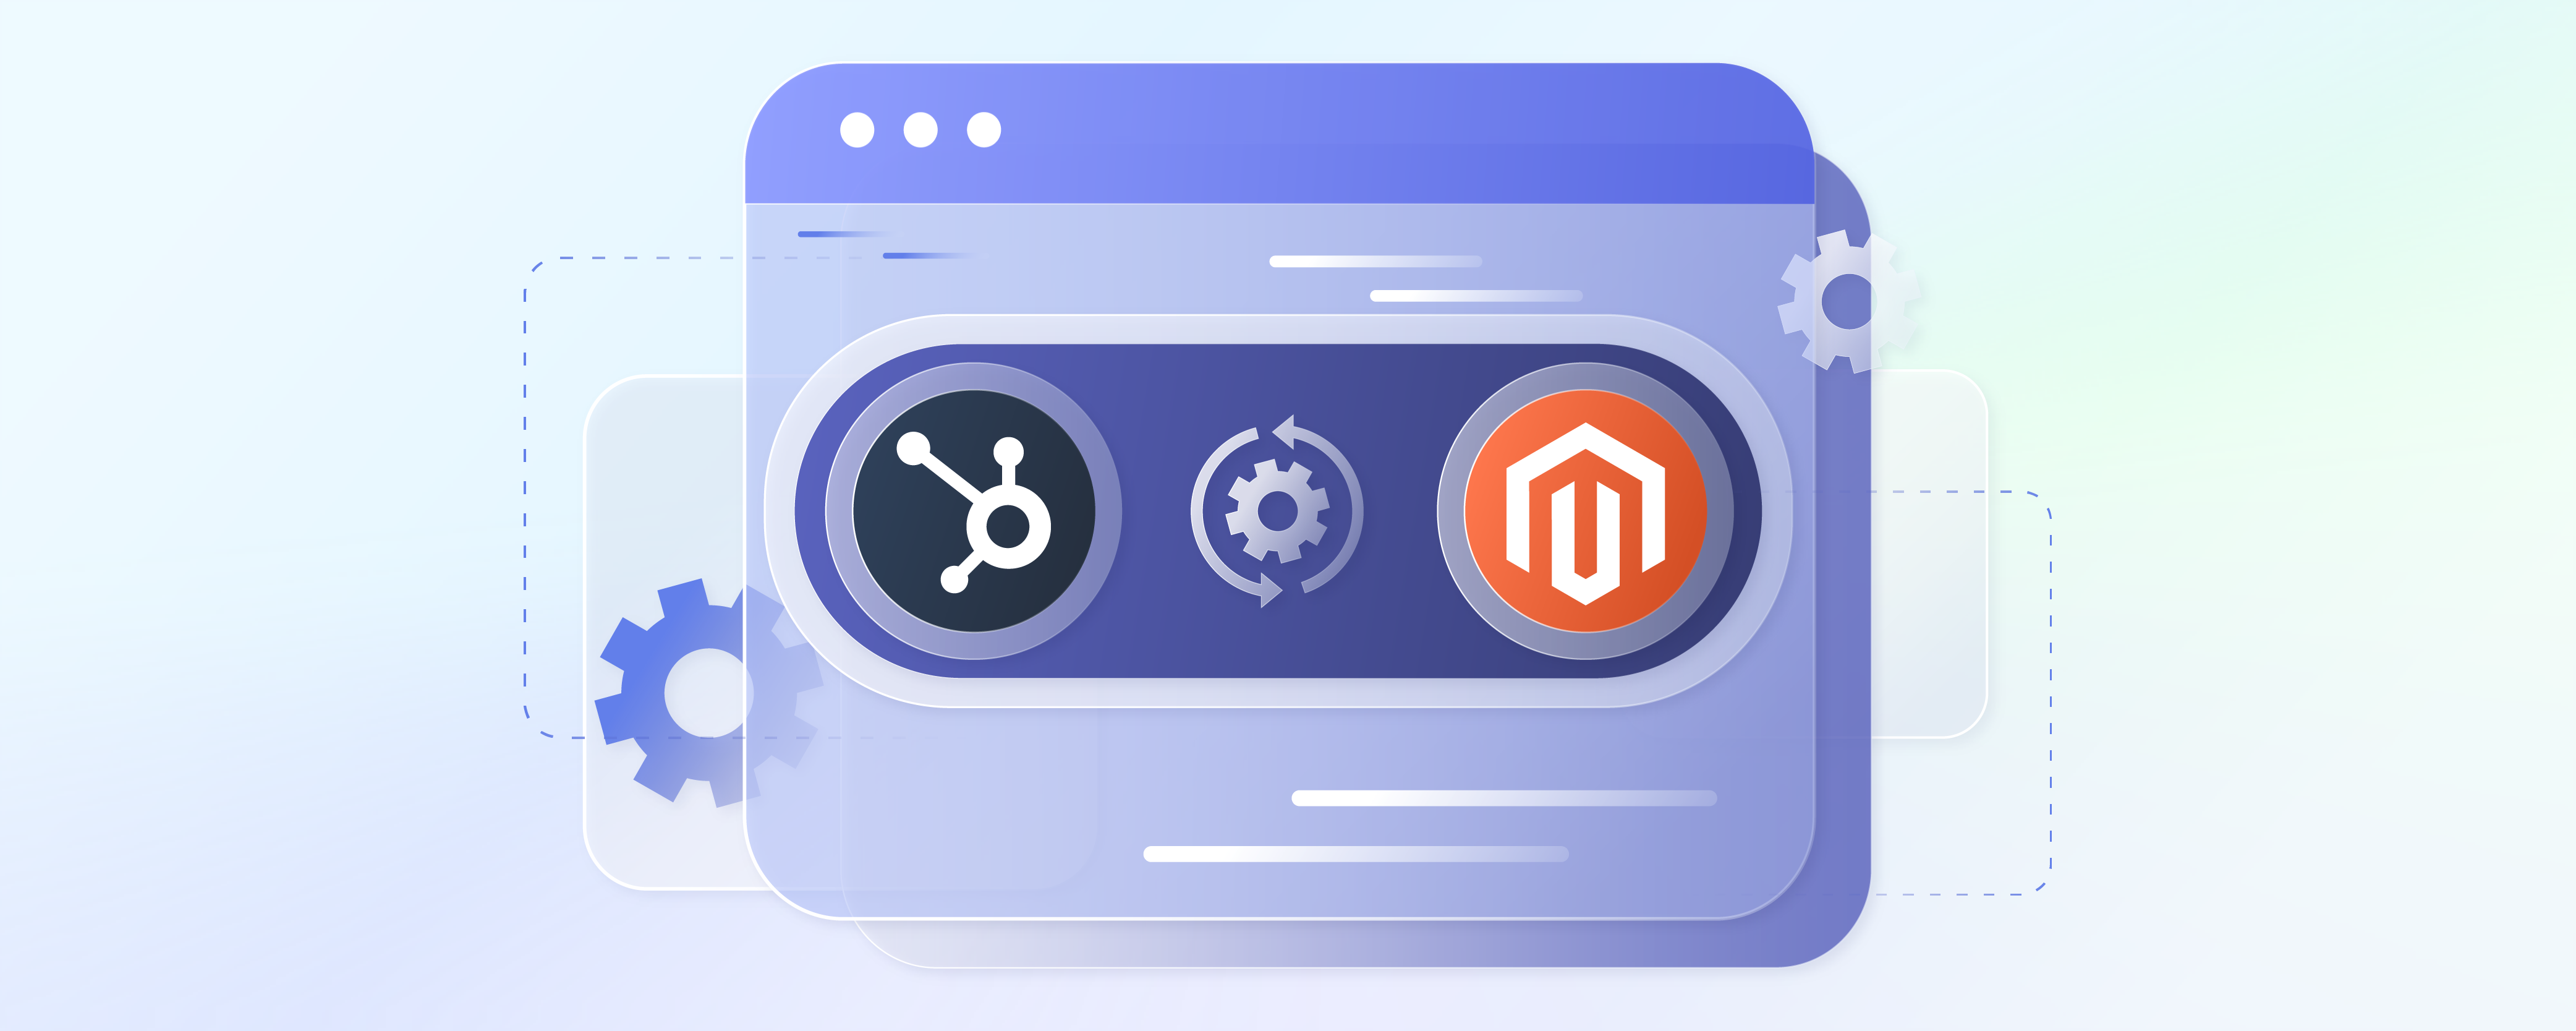 Hubspot Magento Integration: Prerequisites and Top Options